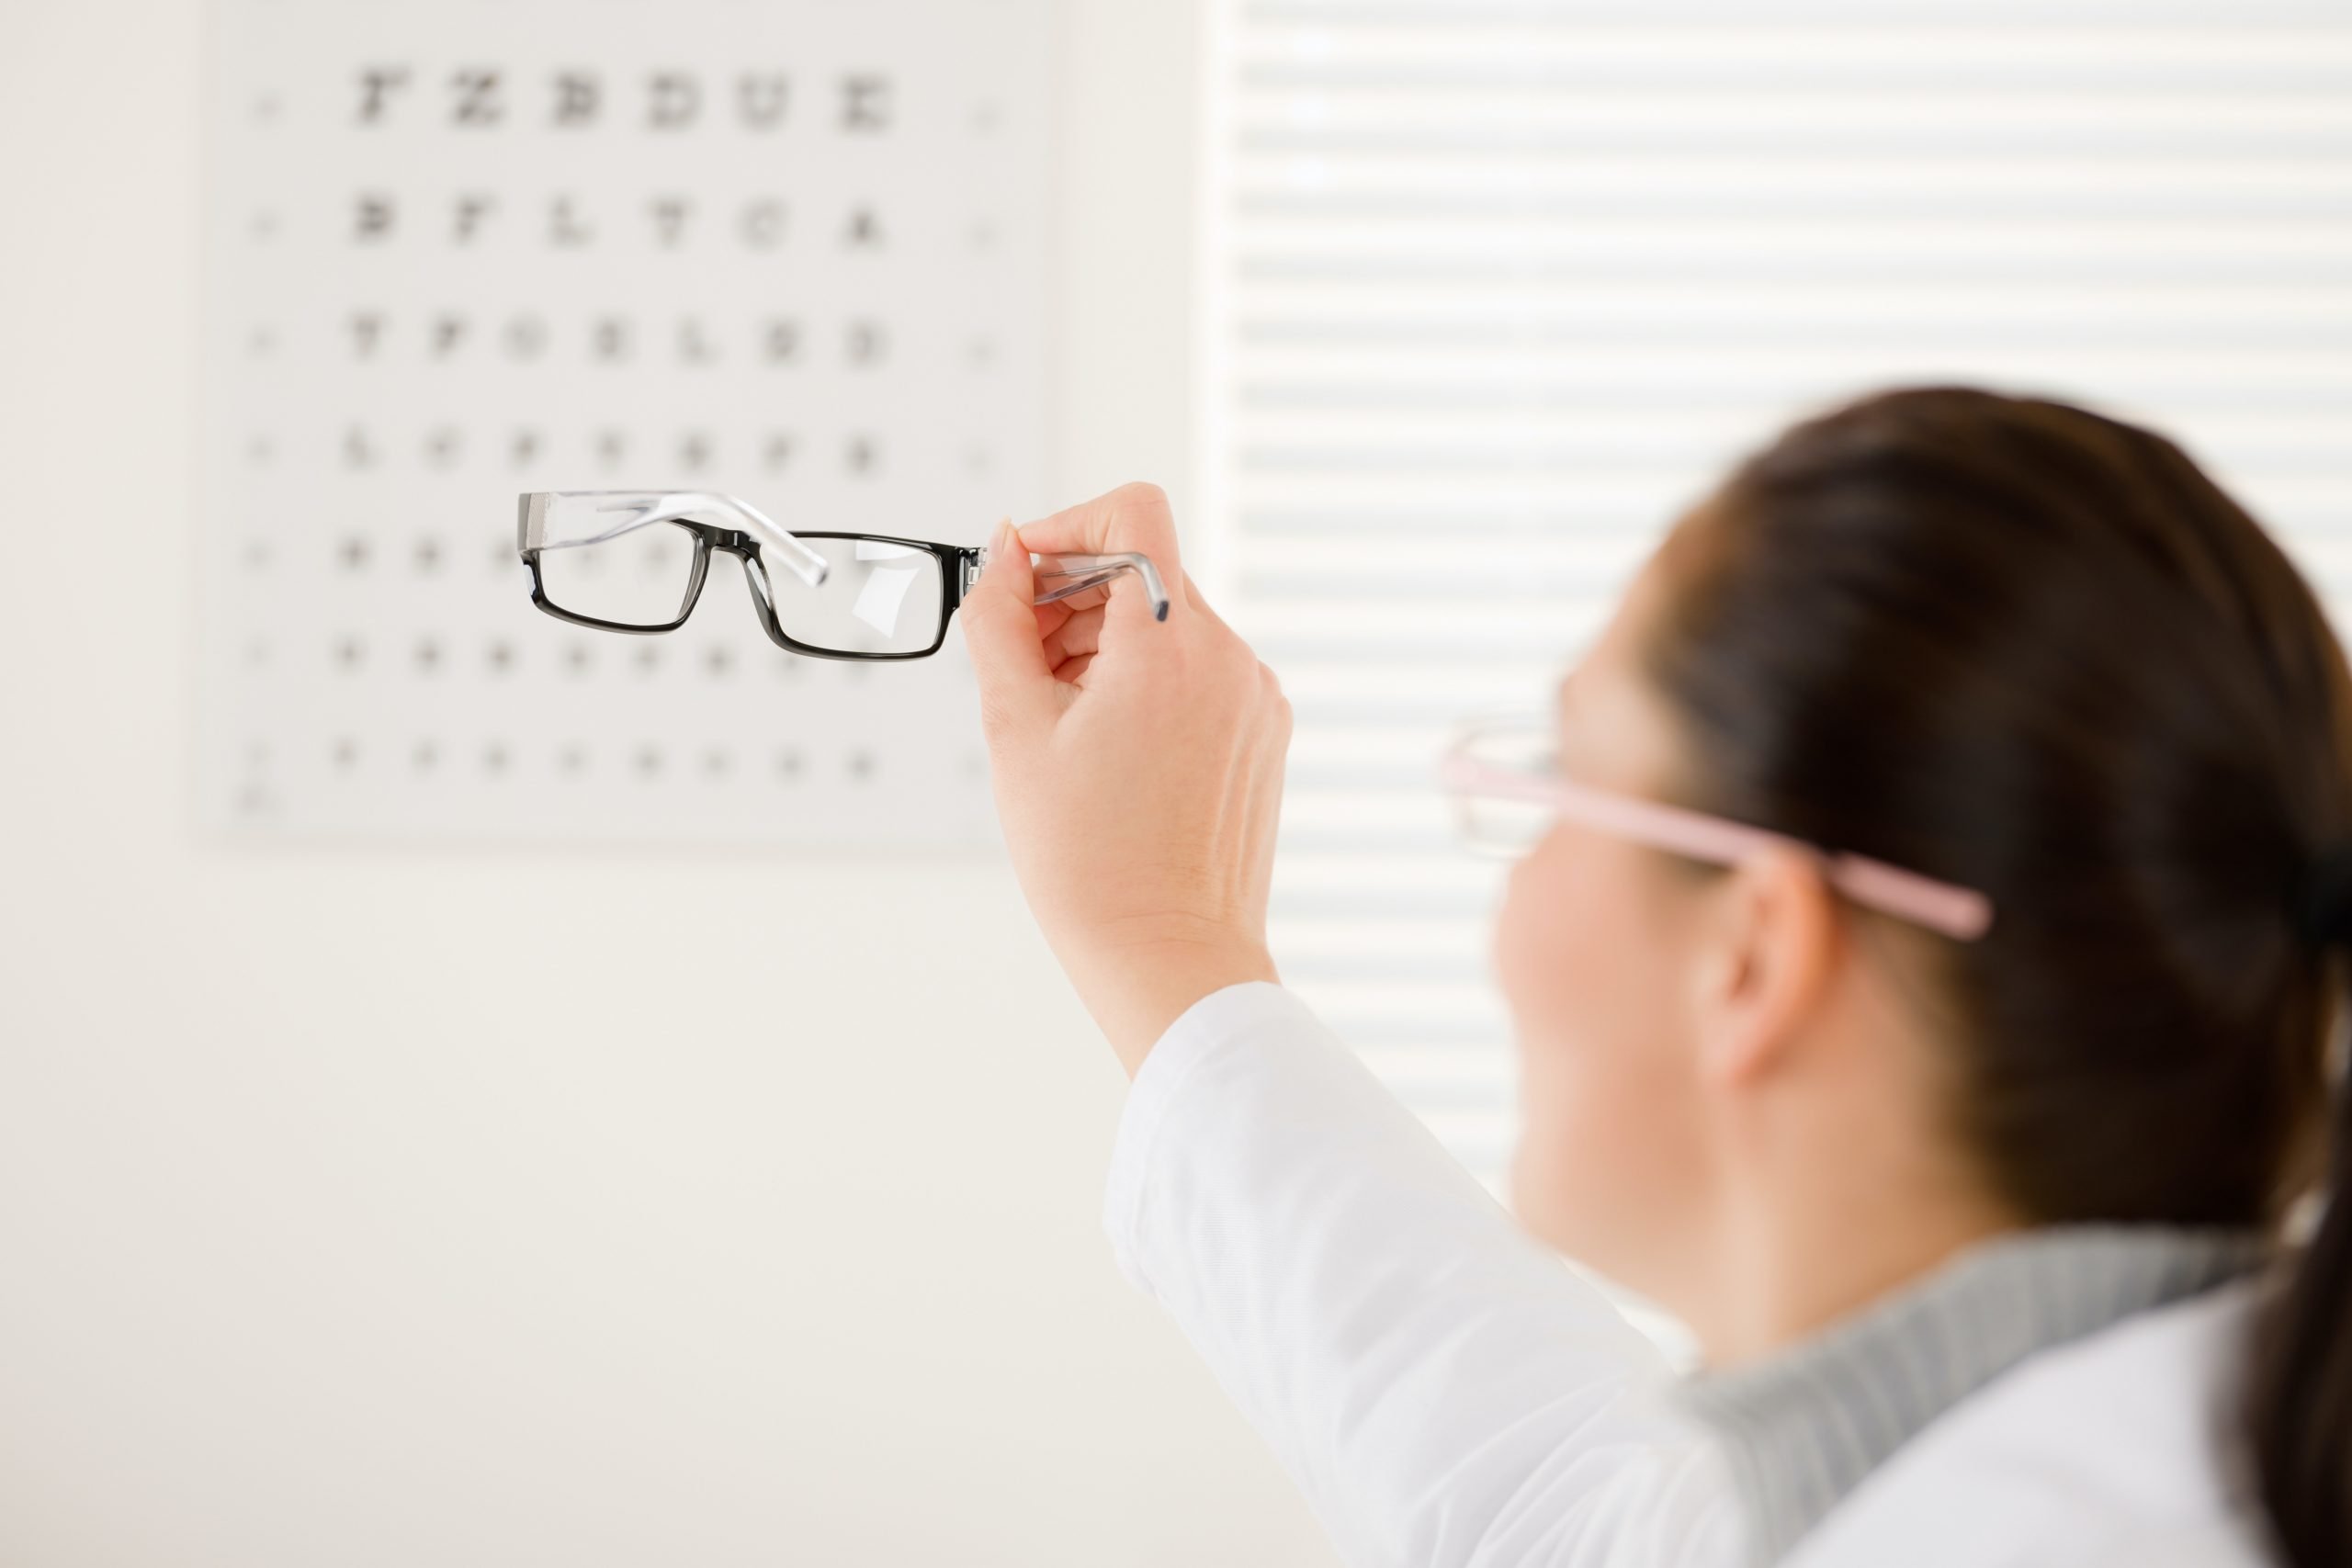 Does Medicare Pay For Eye Exams?